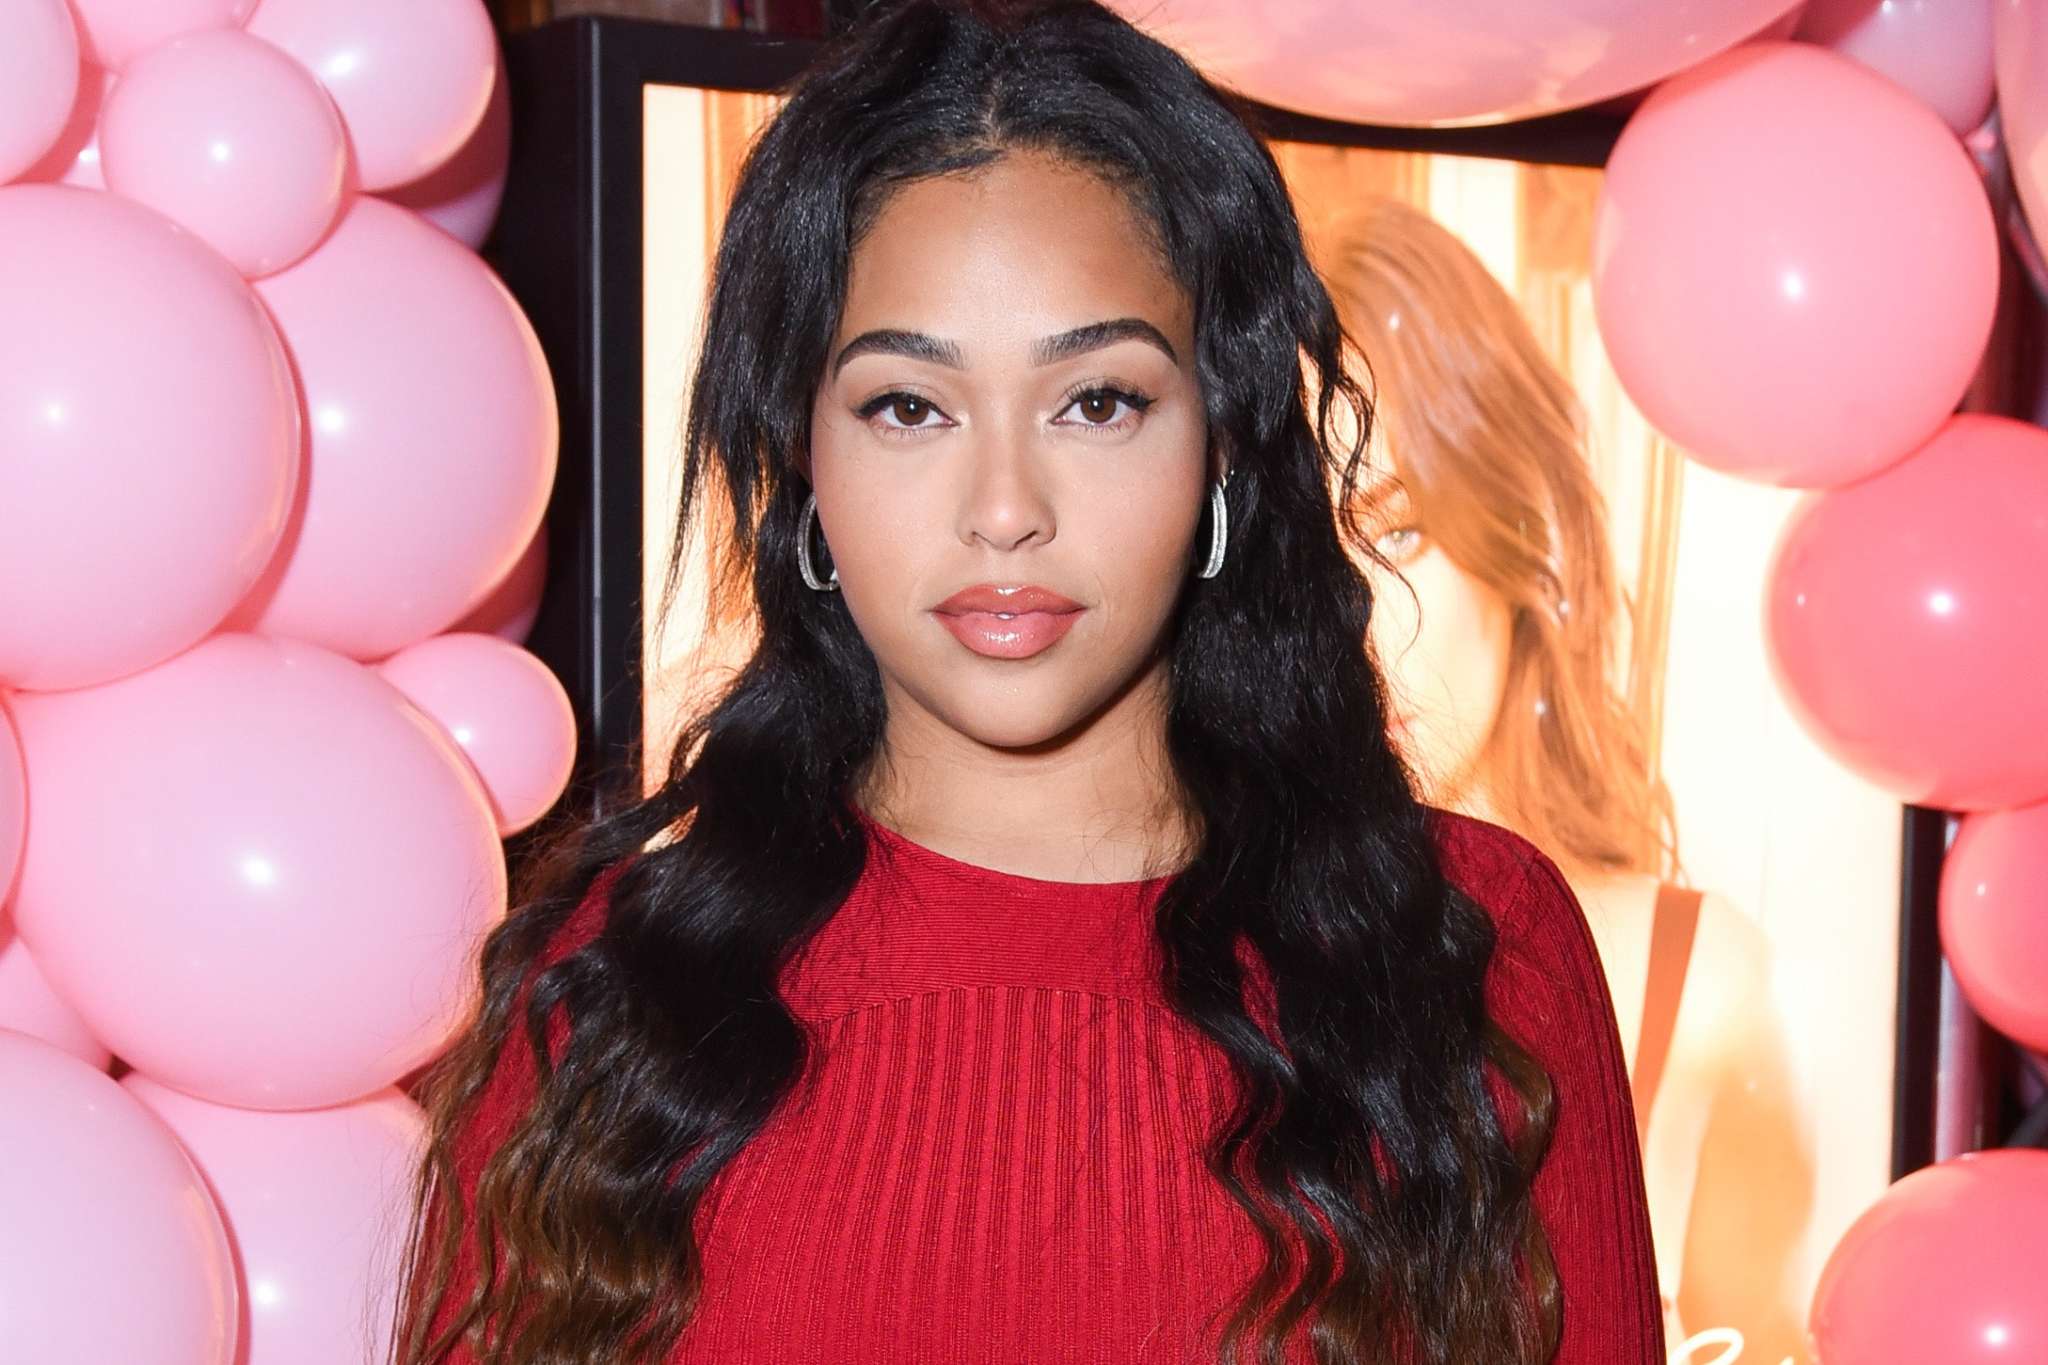 Jordyn Woods Is Glowing In Her Latest Photo - Check Her Out Driving This Red Beauty